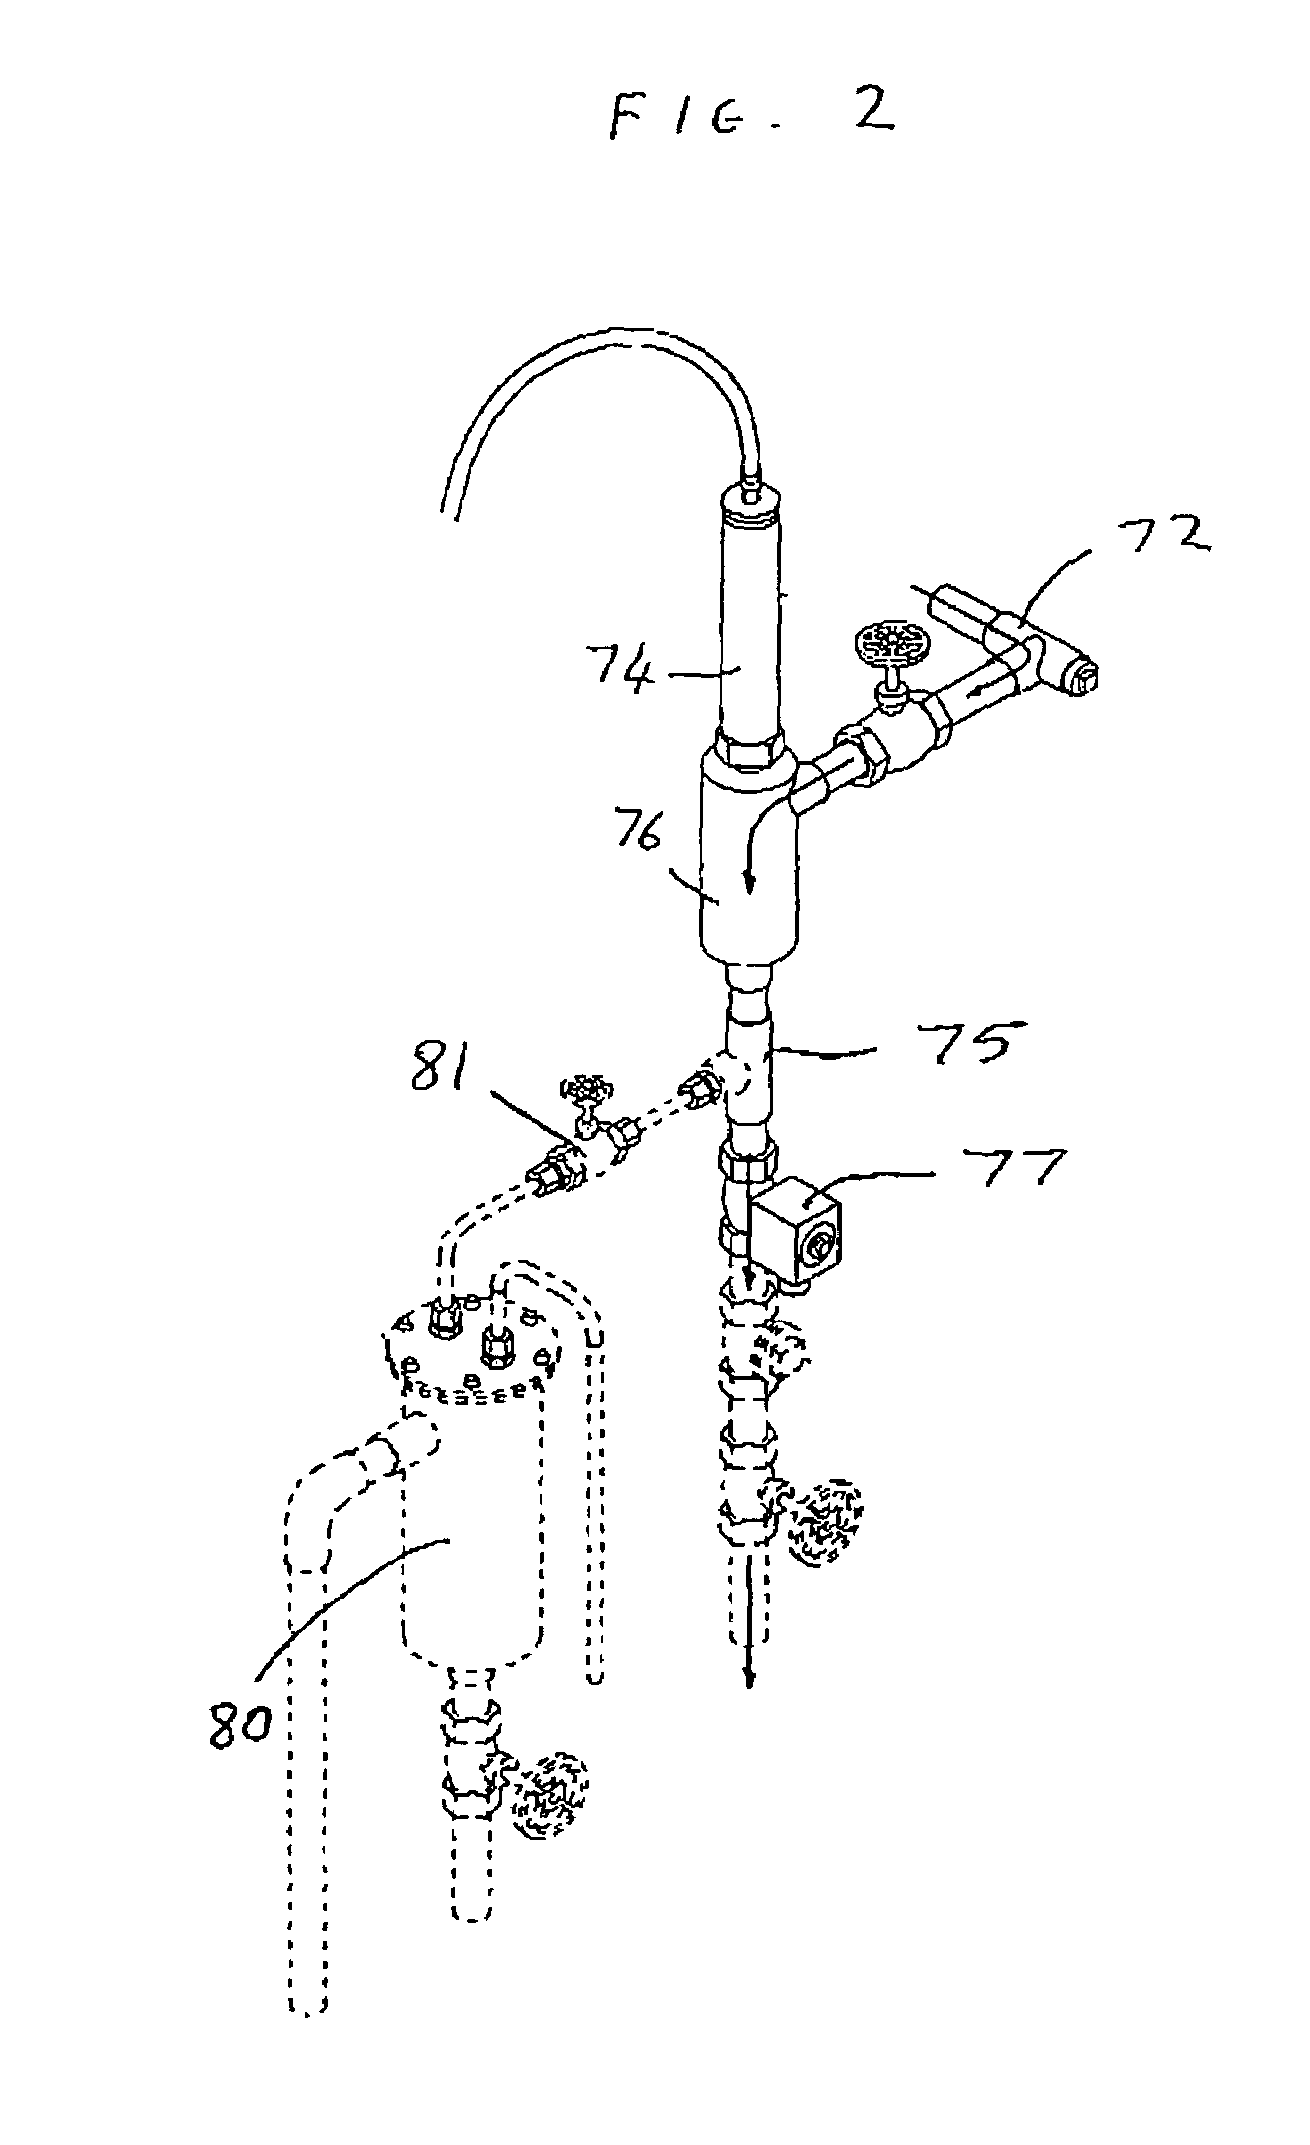 Apparatus and method for measuring total dissolved solids in a steam boiler